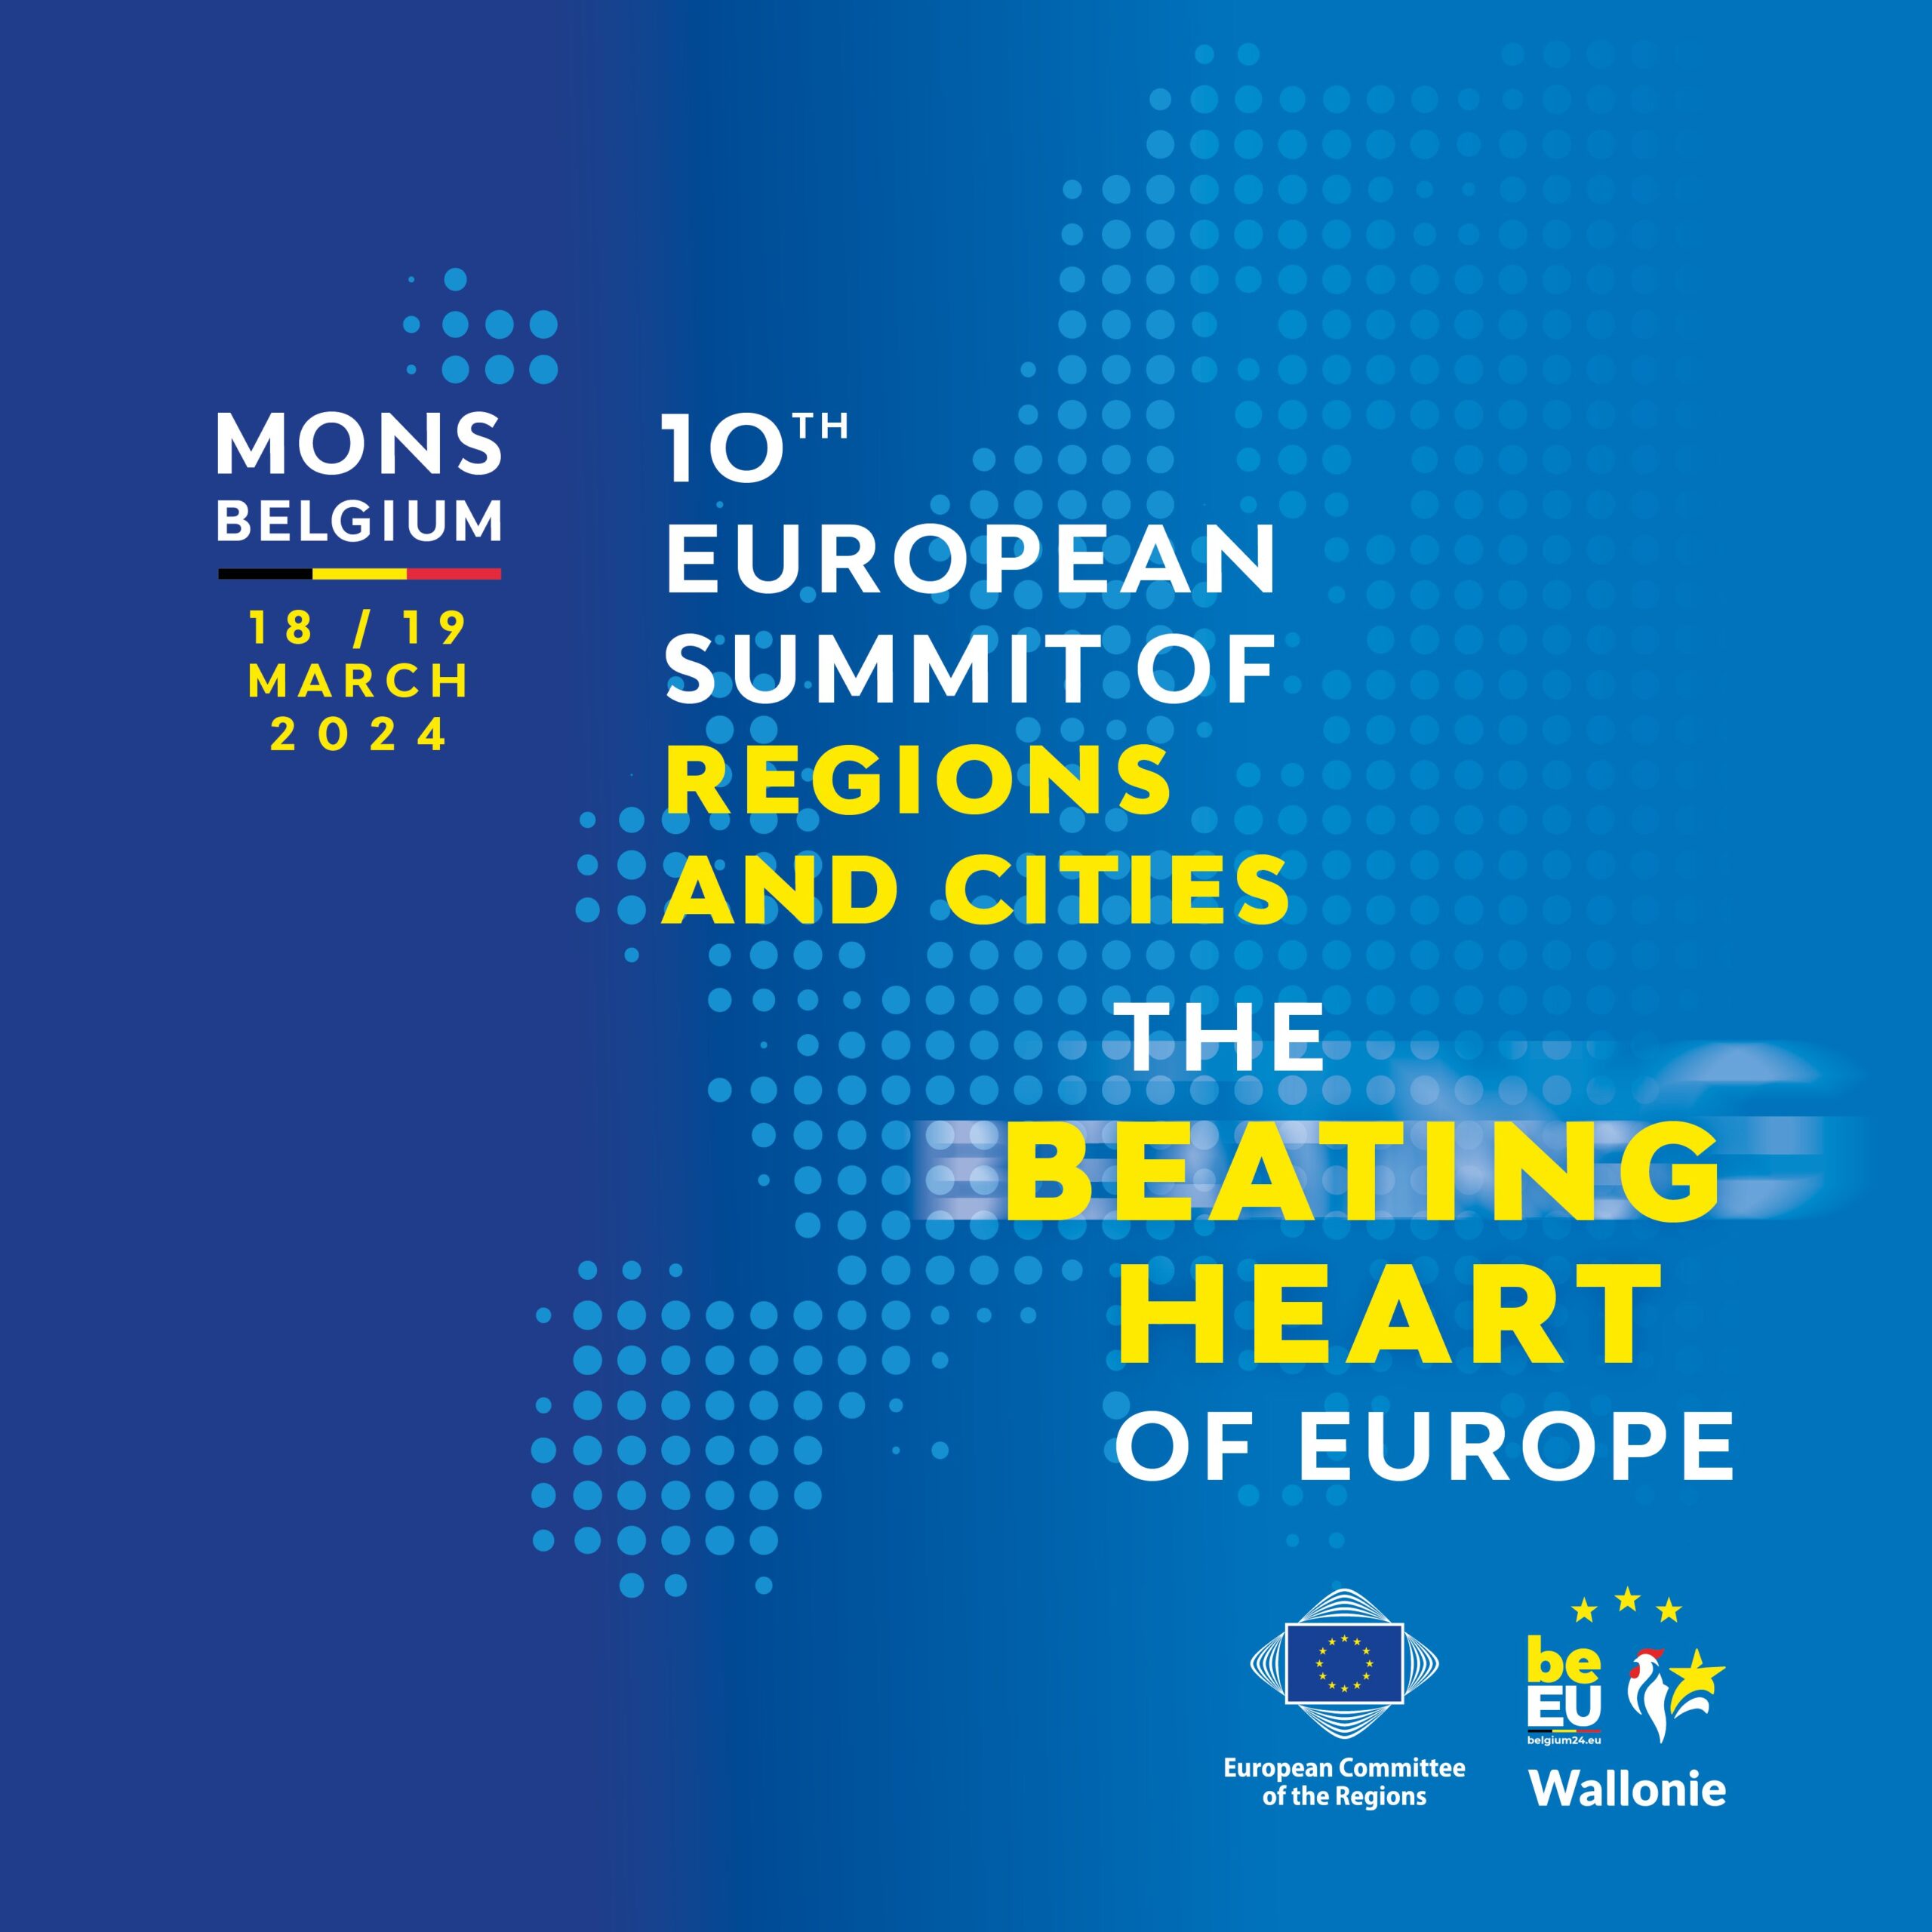 European Summit of Regions and Cities